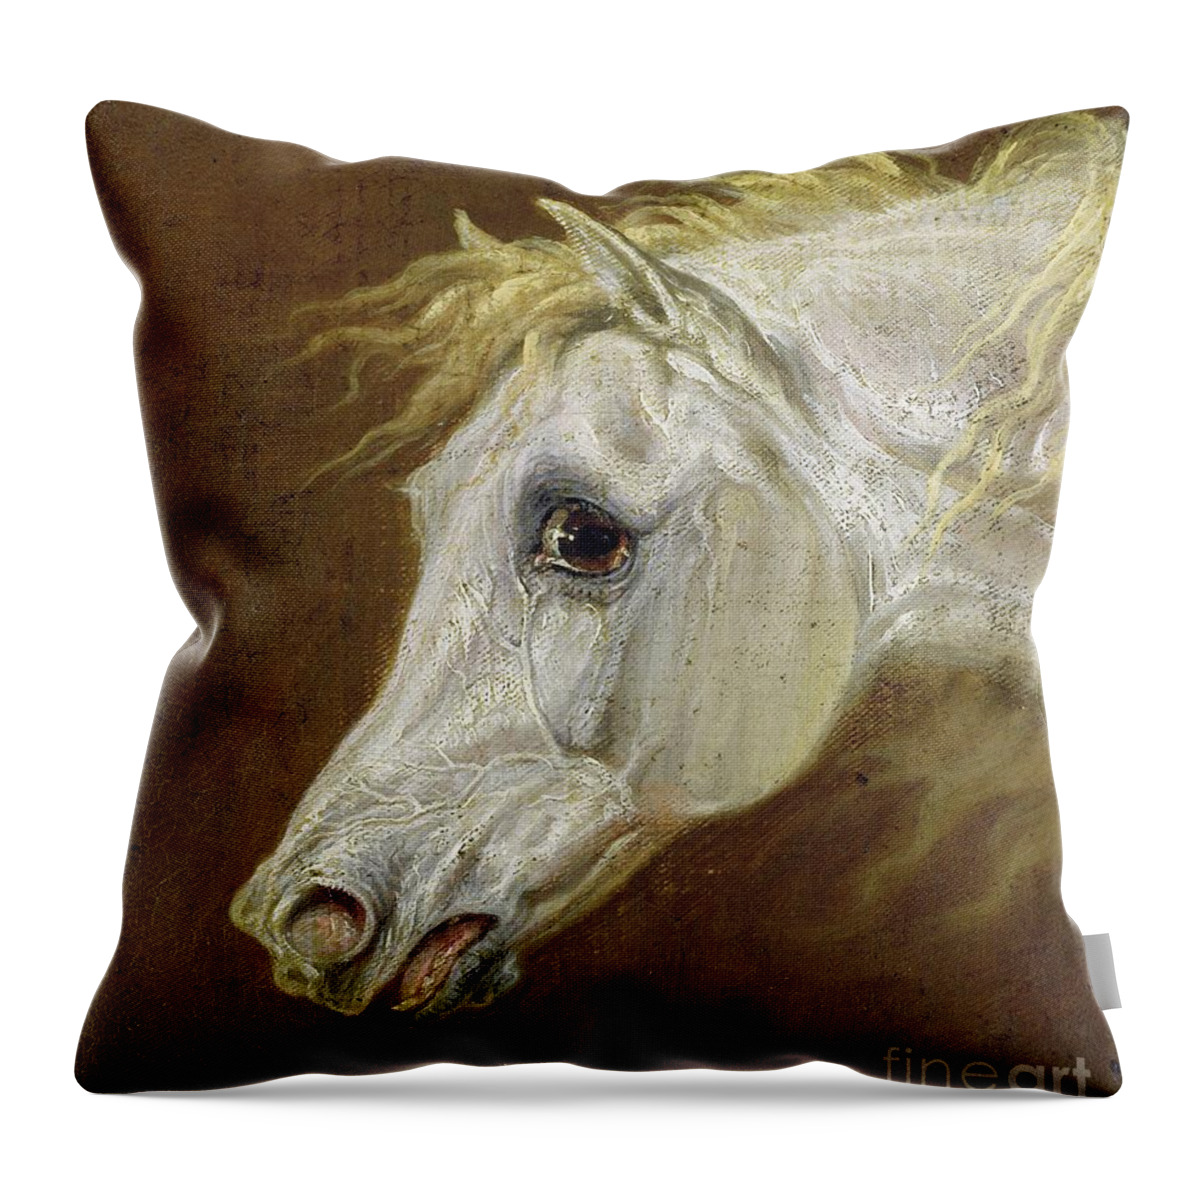 Portrait Throw Pillow featuring the painting Head Of A Grey Arabian Horse by Martin Theodore Ward